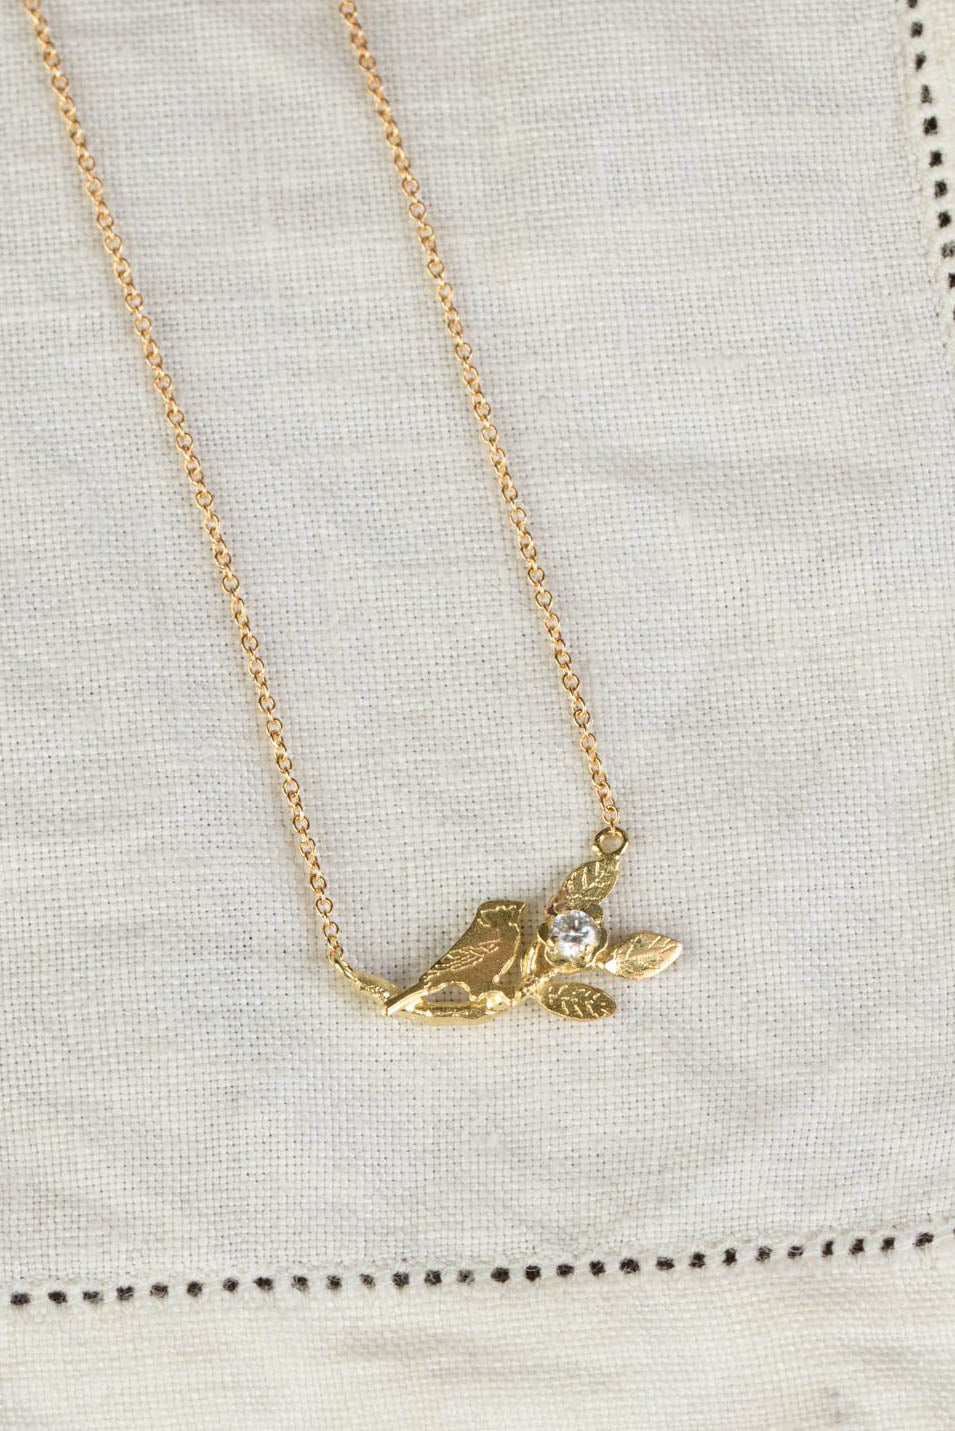 handmade bird and leaf necklace in 18ct gold with diamond